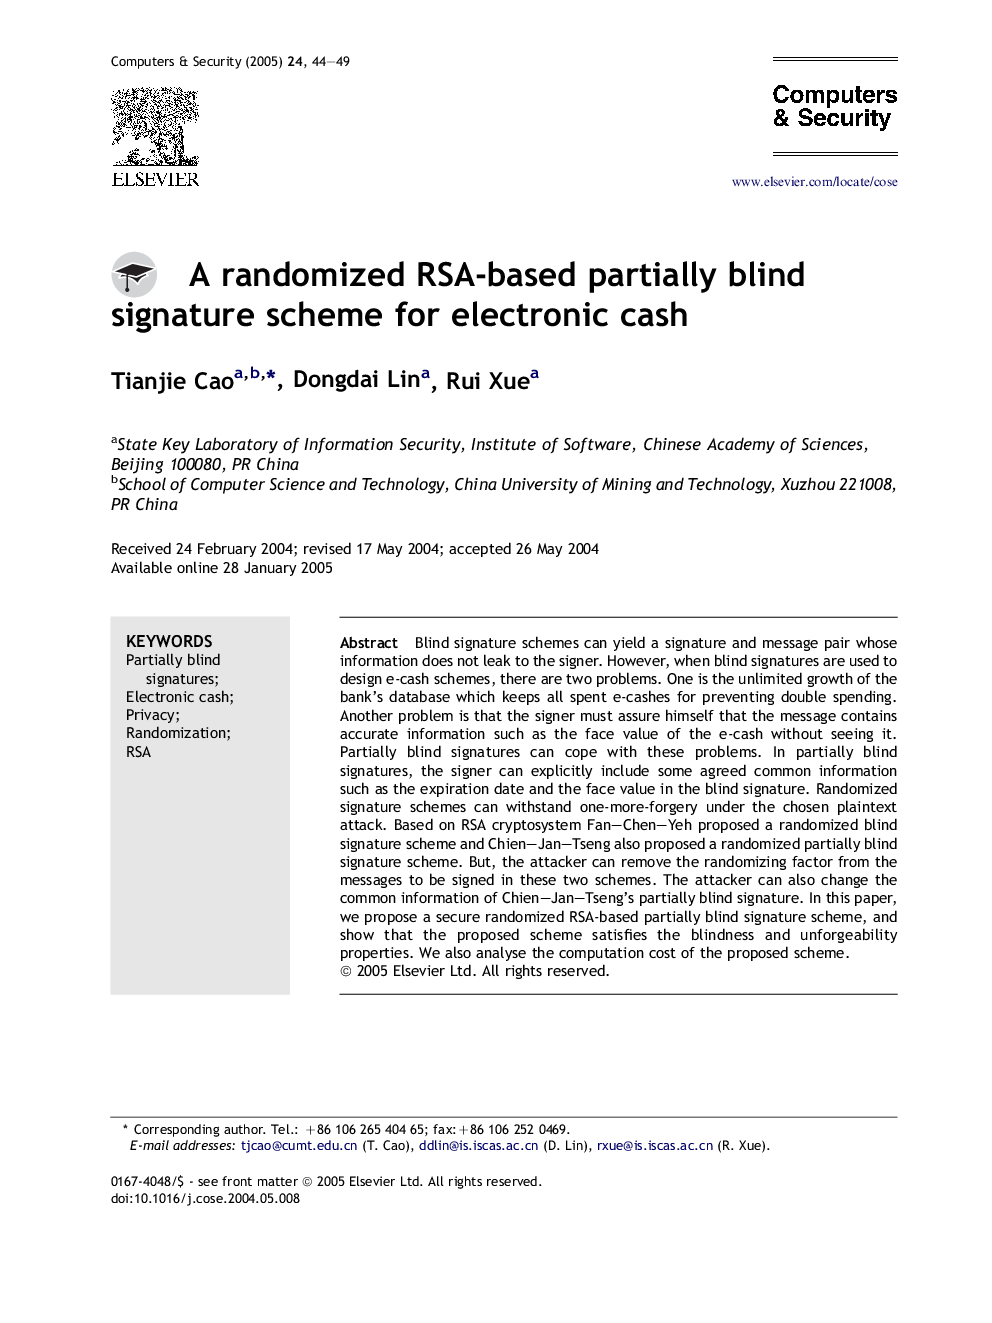 A randomized RSA-based partially blind signature scheme for electronic cash